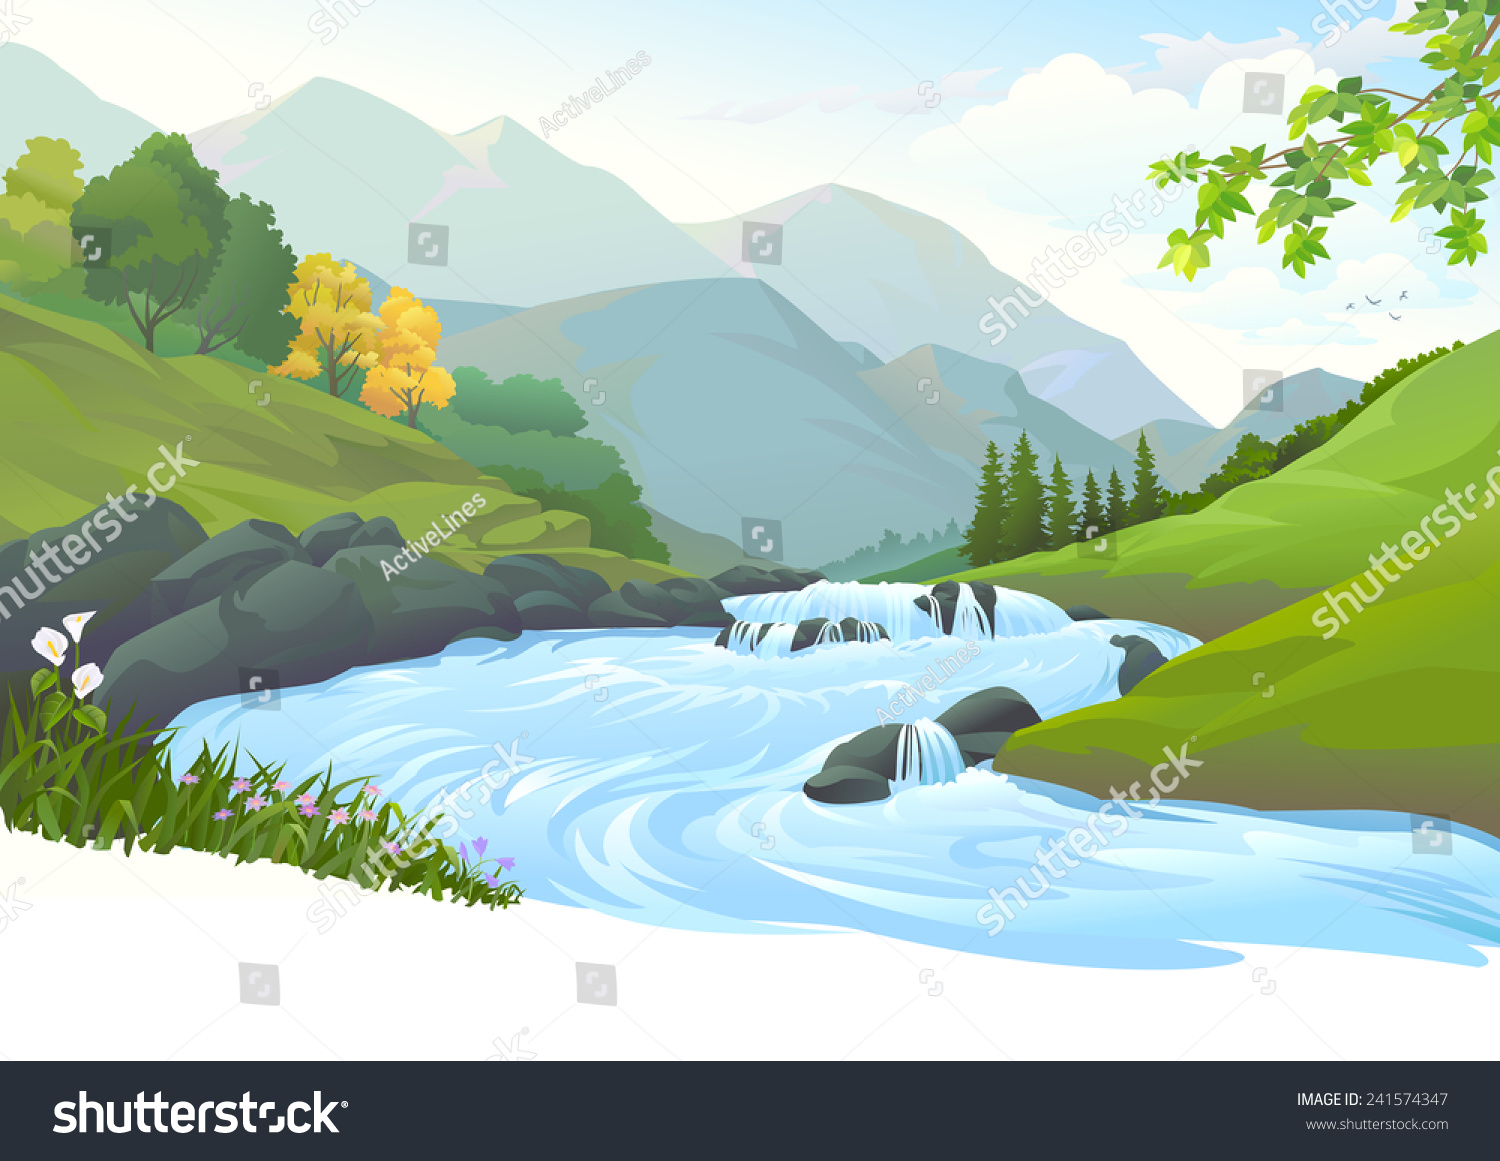 river animated clipart - photo #50